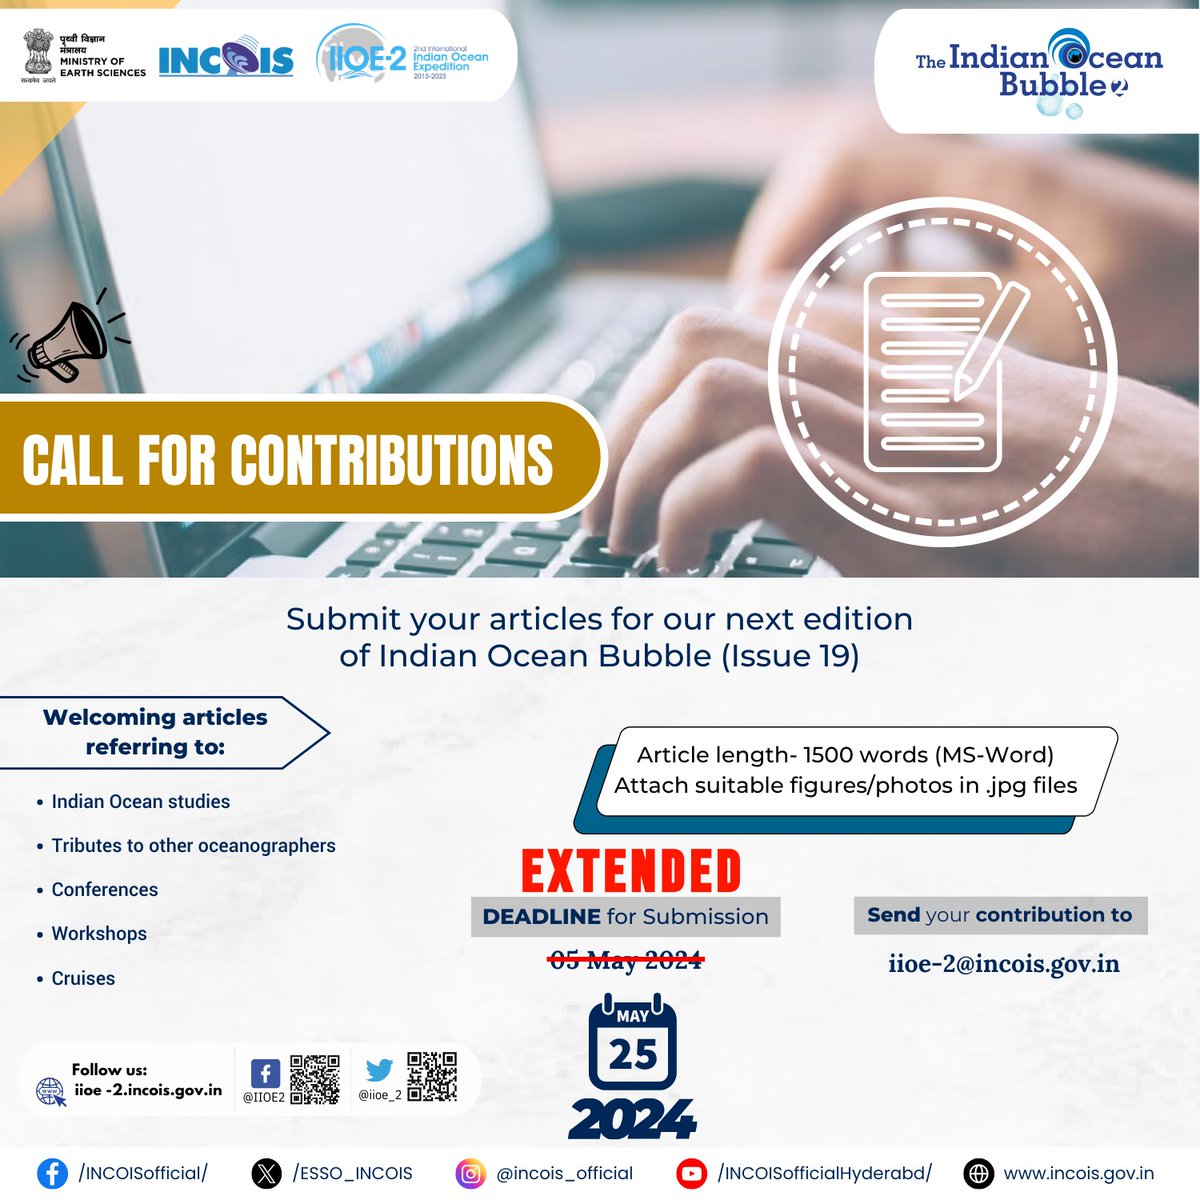 📢 Deadline Extension Alert! Attention all contributors! Date for submission of articles for the Indian Ocean Bubble's next issue has been extended to May 25th, 2024! Don't miss out on this opportunity. Send in your articles and accompanying photos by the new deadline. ✍️